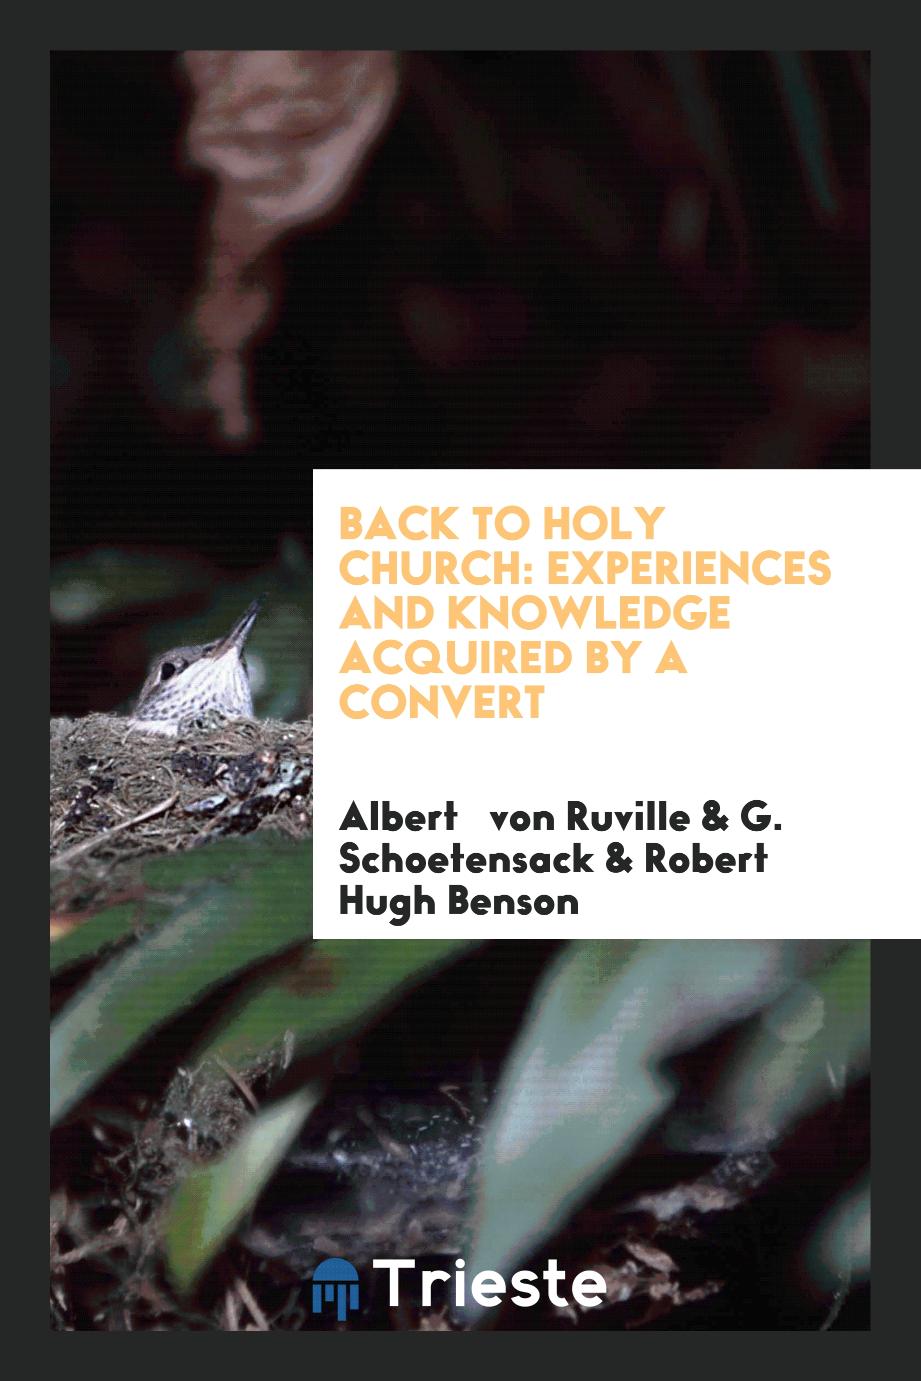 Back to Holy church: experiences and knowledge acquired by a convert